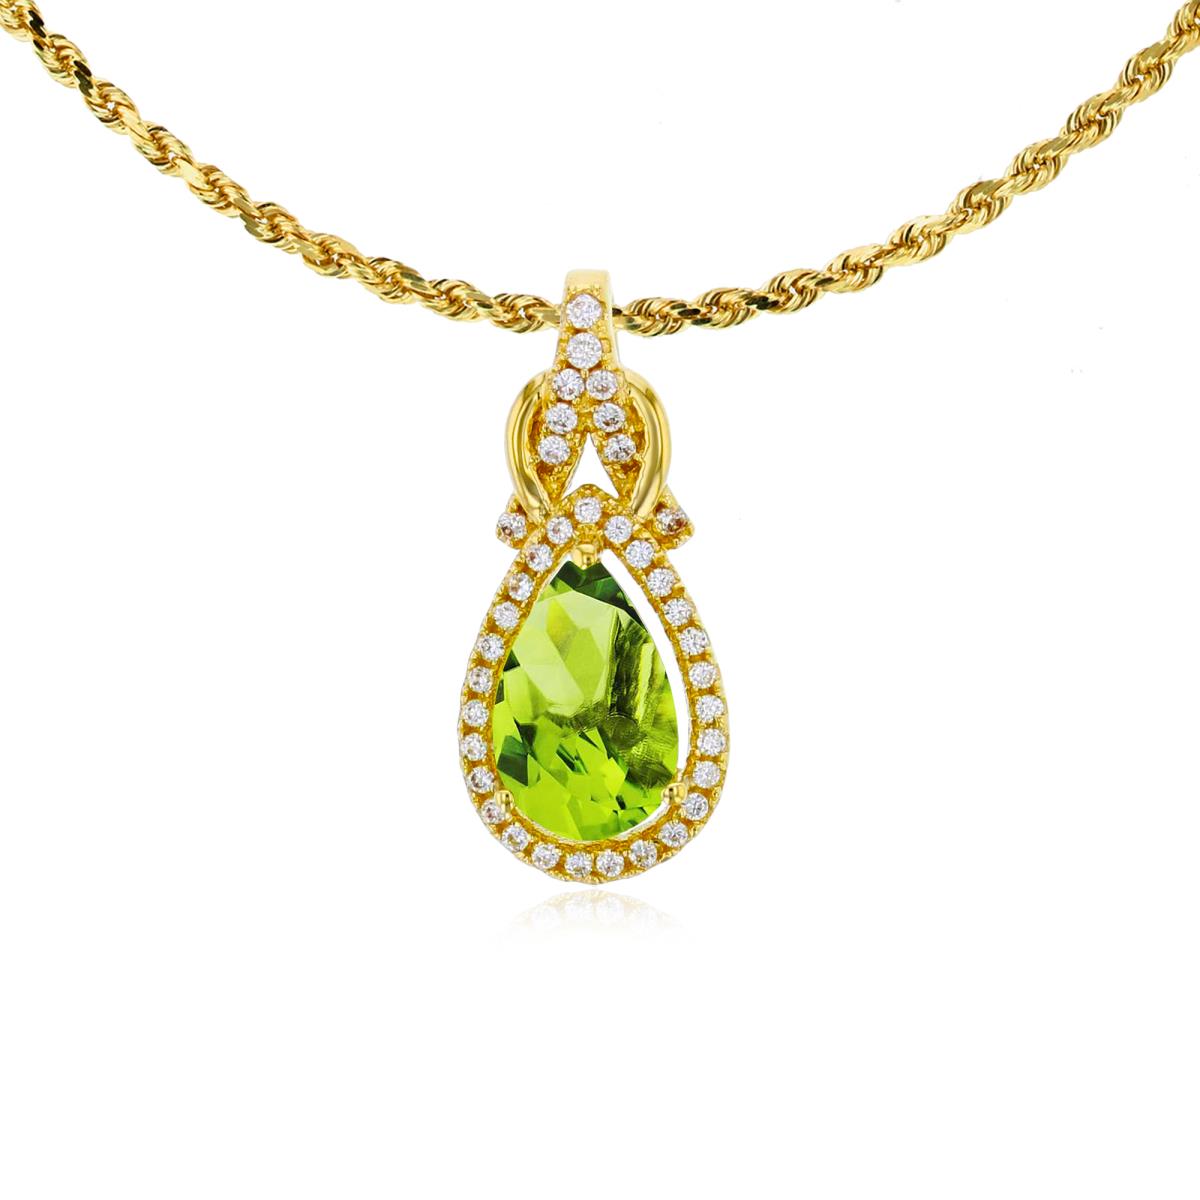 14K Yellow Gold 8x5mm Pear Cut Peridot & 0.11 CTTW Rnd Diamond Knot 18" Rope Chain Necklace